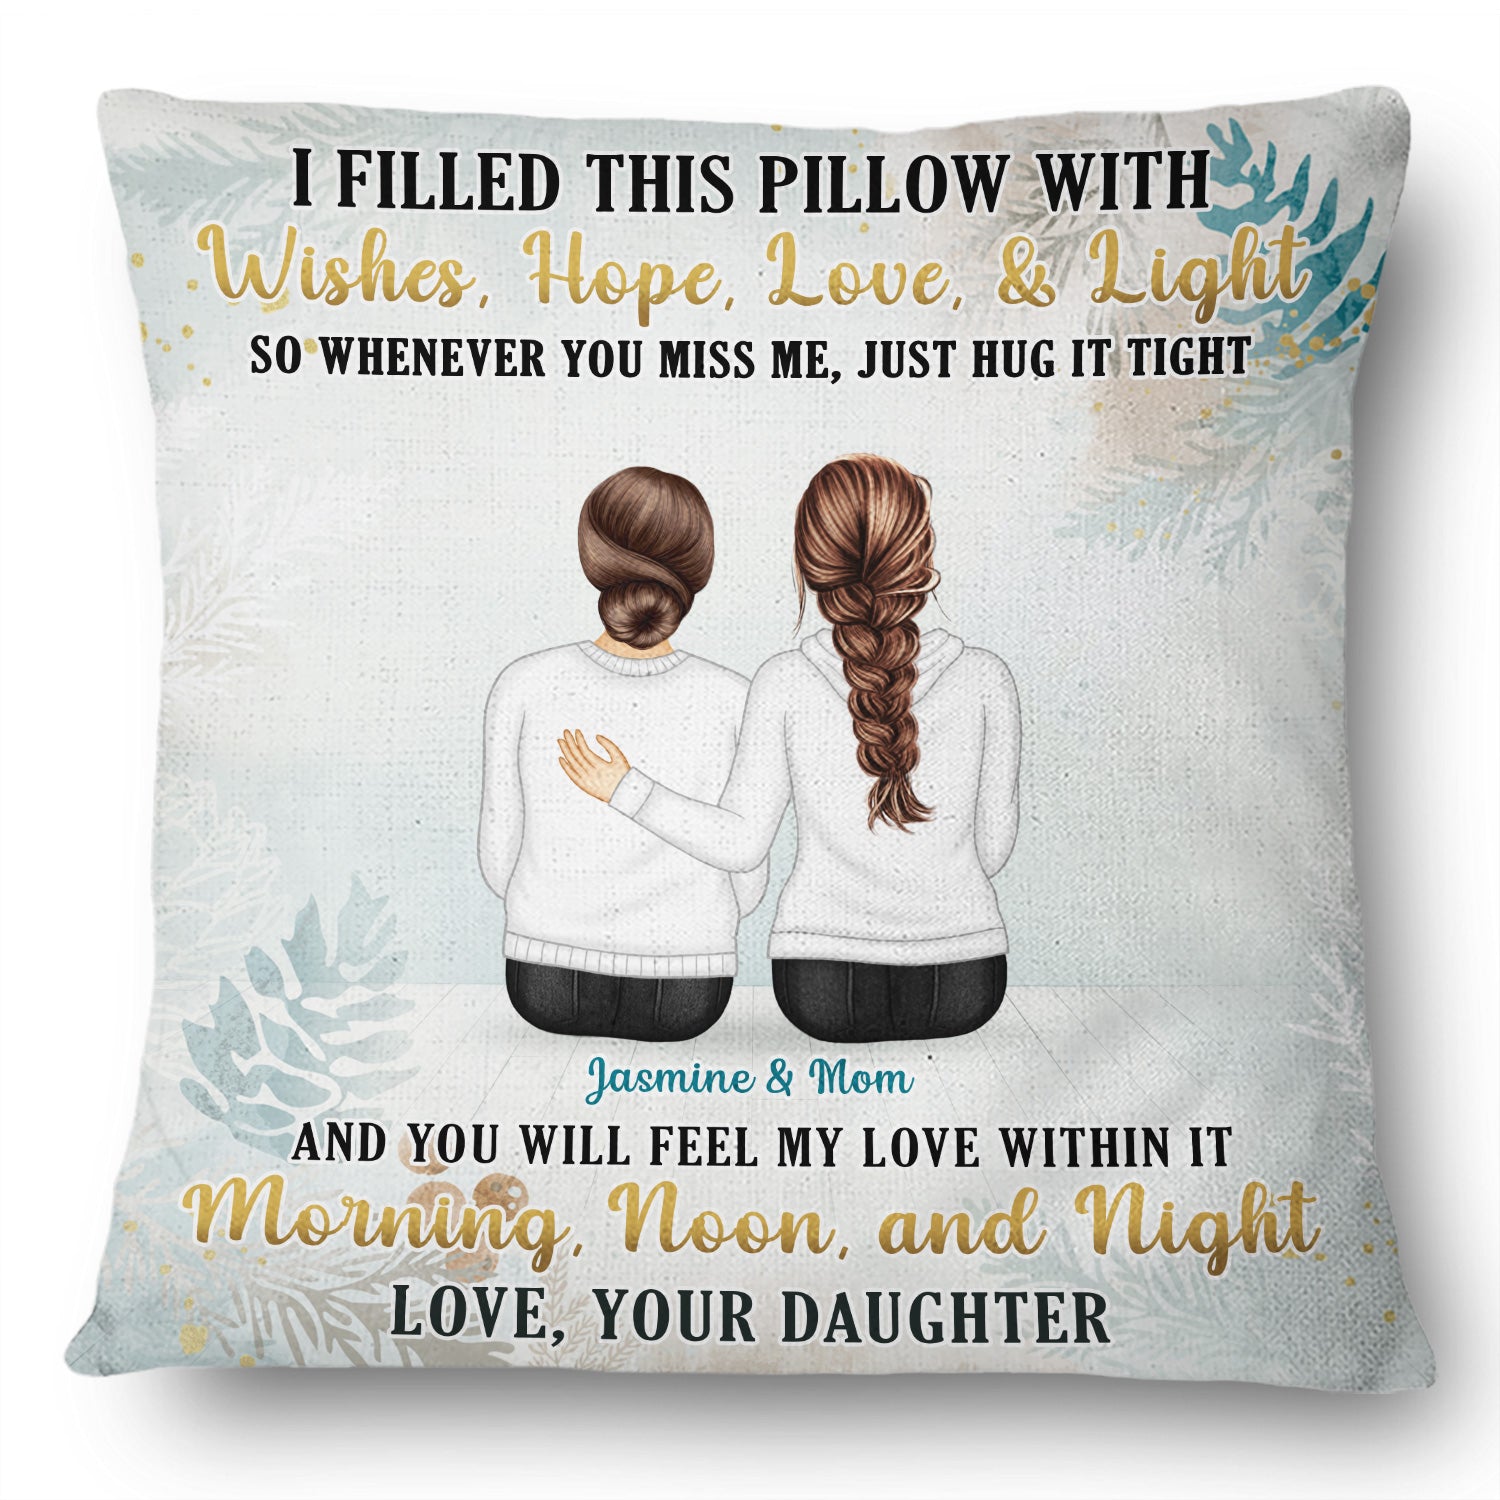 Wishes, Hope, Love And Light - Gift For Grandparents And Parents - Personalized Custom Pillow